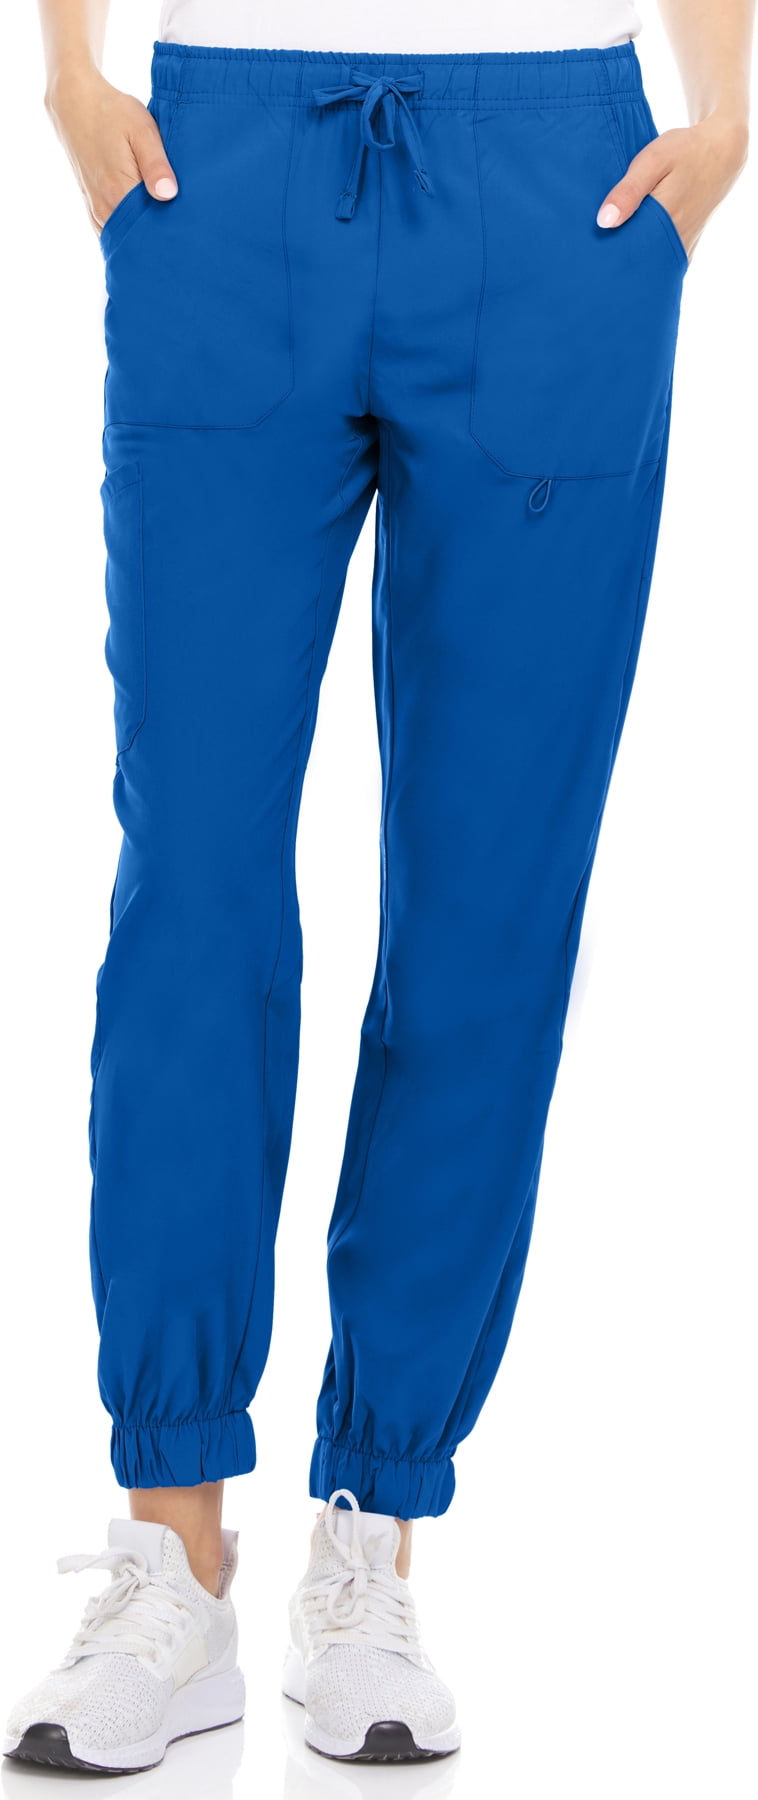 Hey Collection Scrubs Mid-Rise 4-Way Stretch Medical Scrub Joggers ...